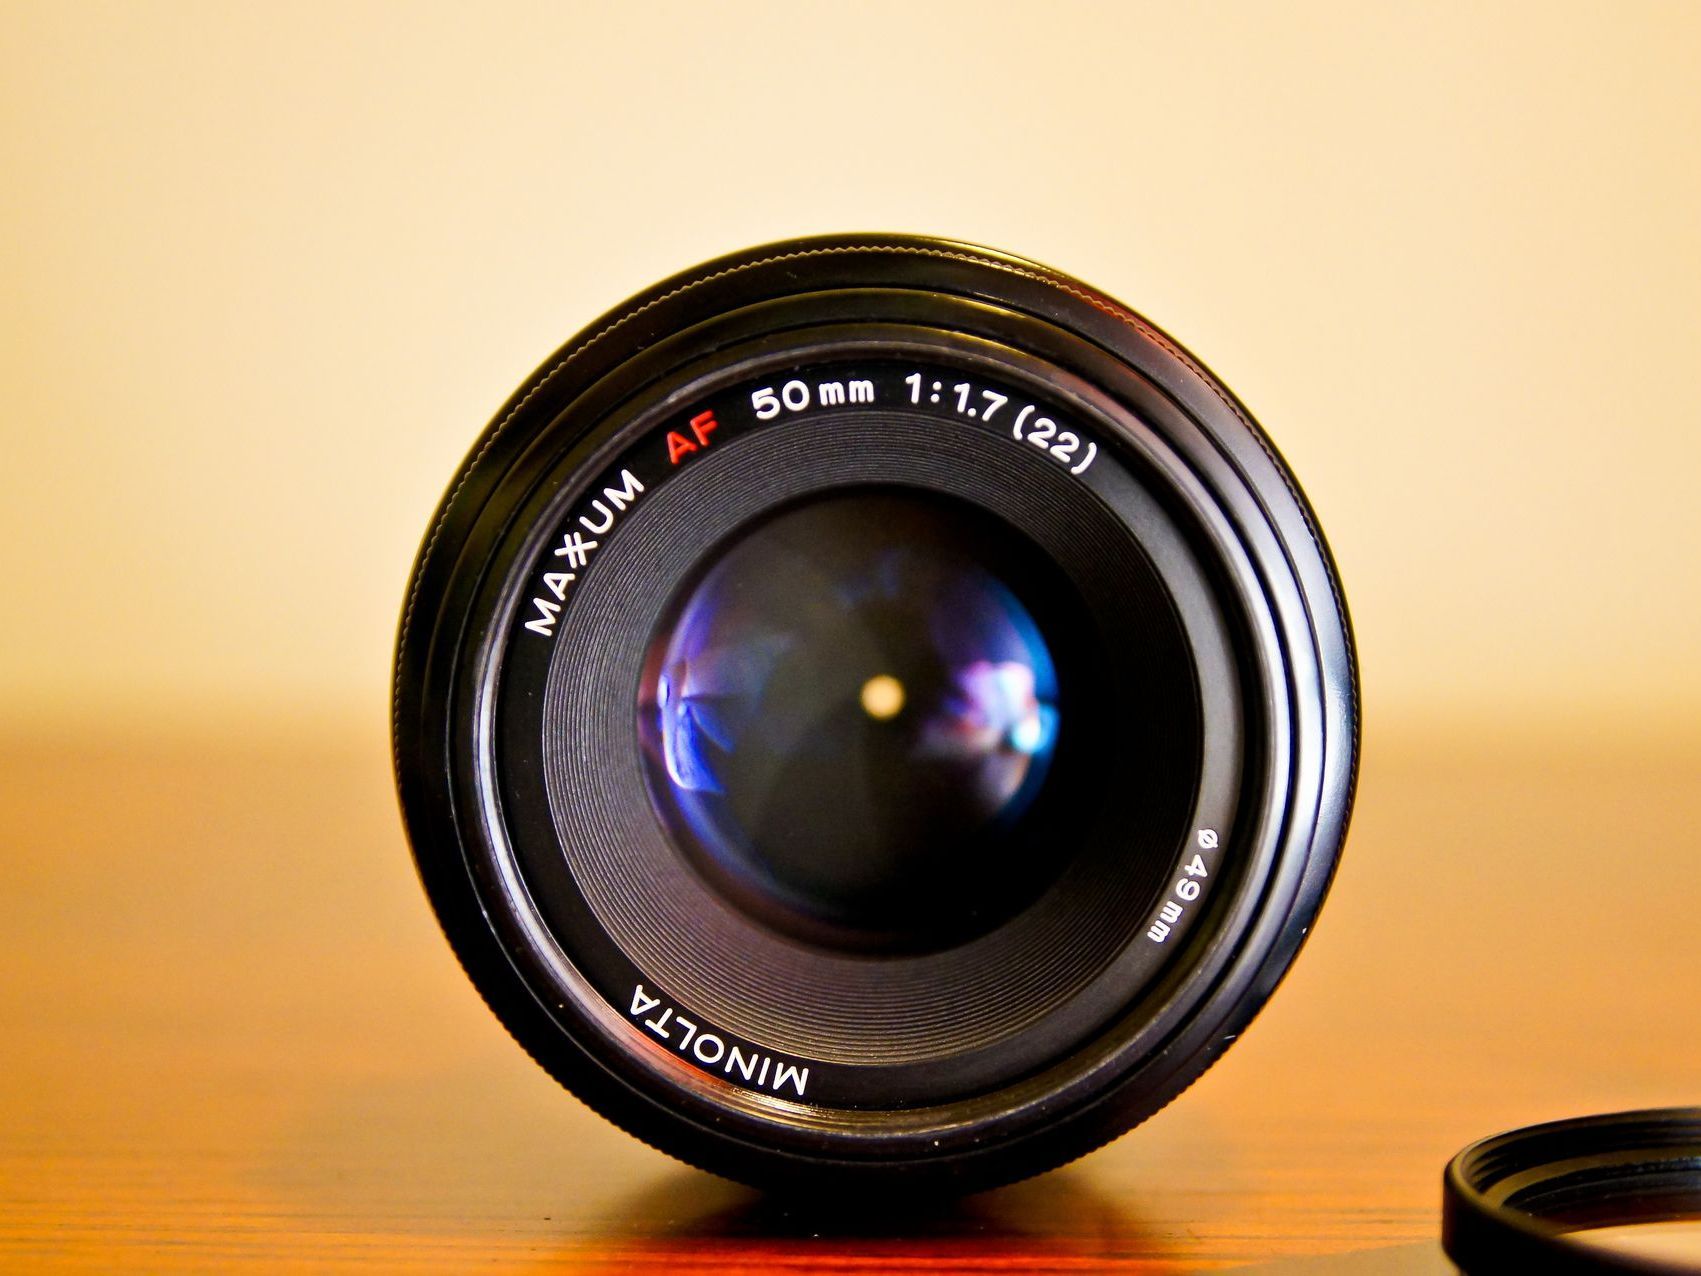 Camera lenses image, preowned camera lens facing  camera on wooden table with yellow wall out of focus in background